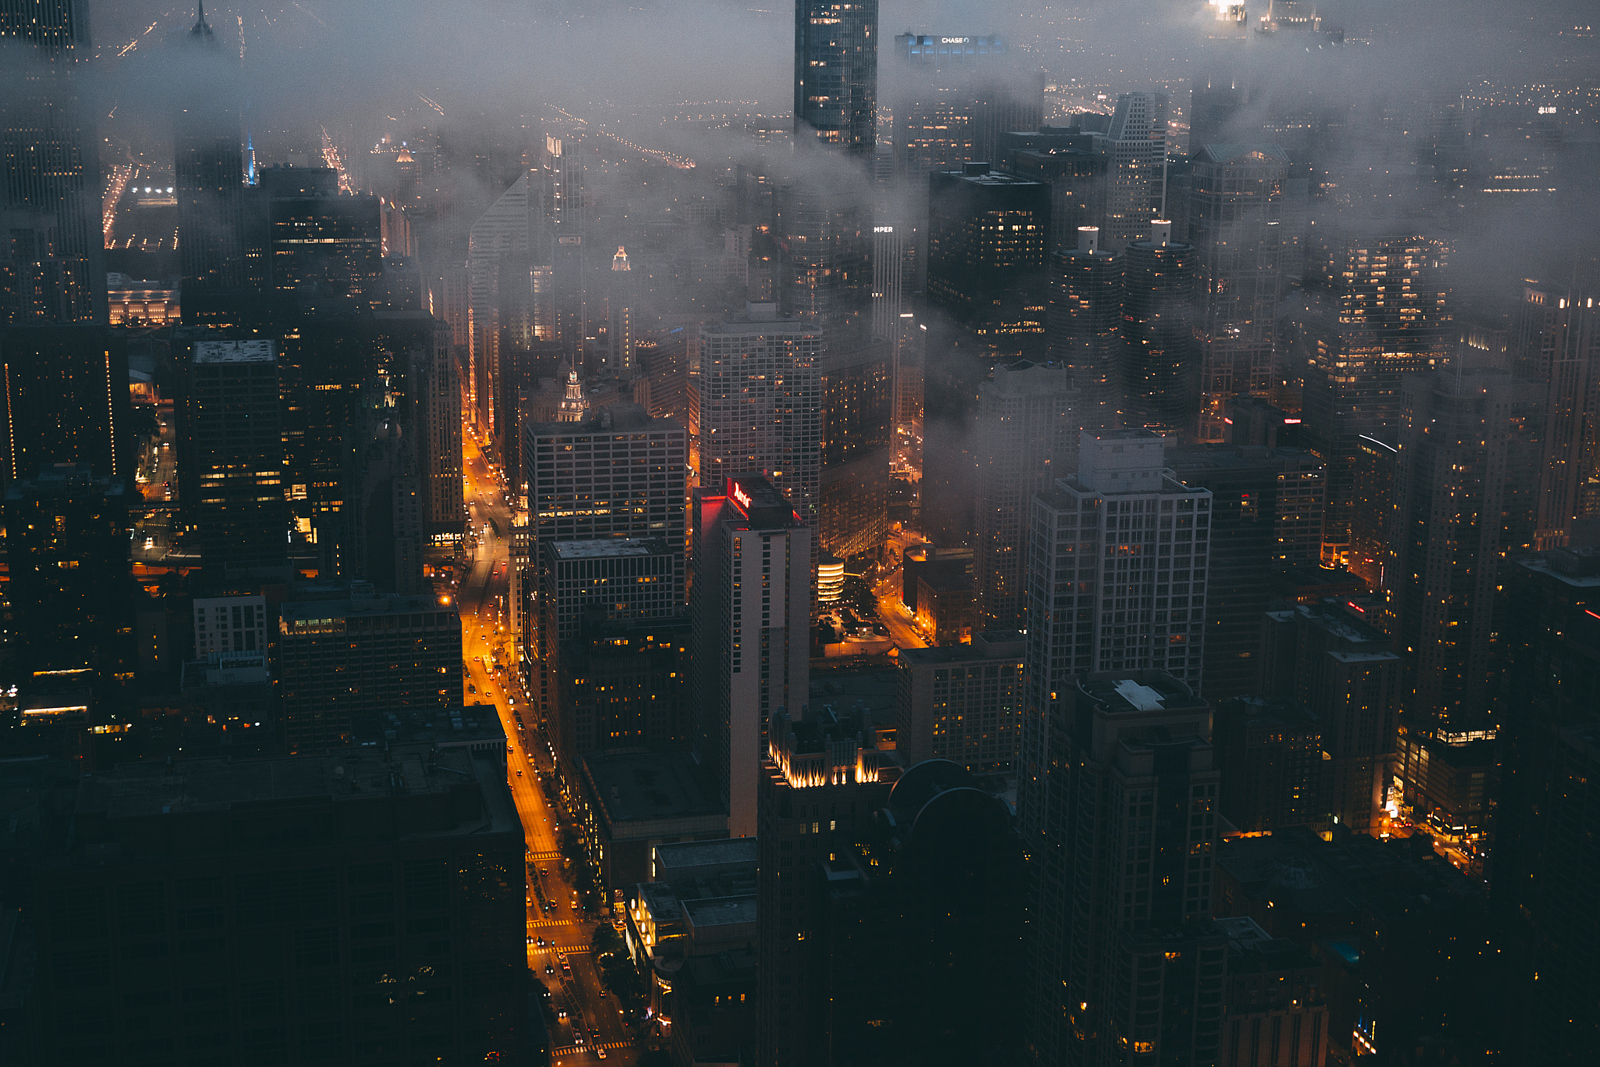 500px NEXT: Moody & Dramatic Cityscapes by Michael Salisbury